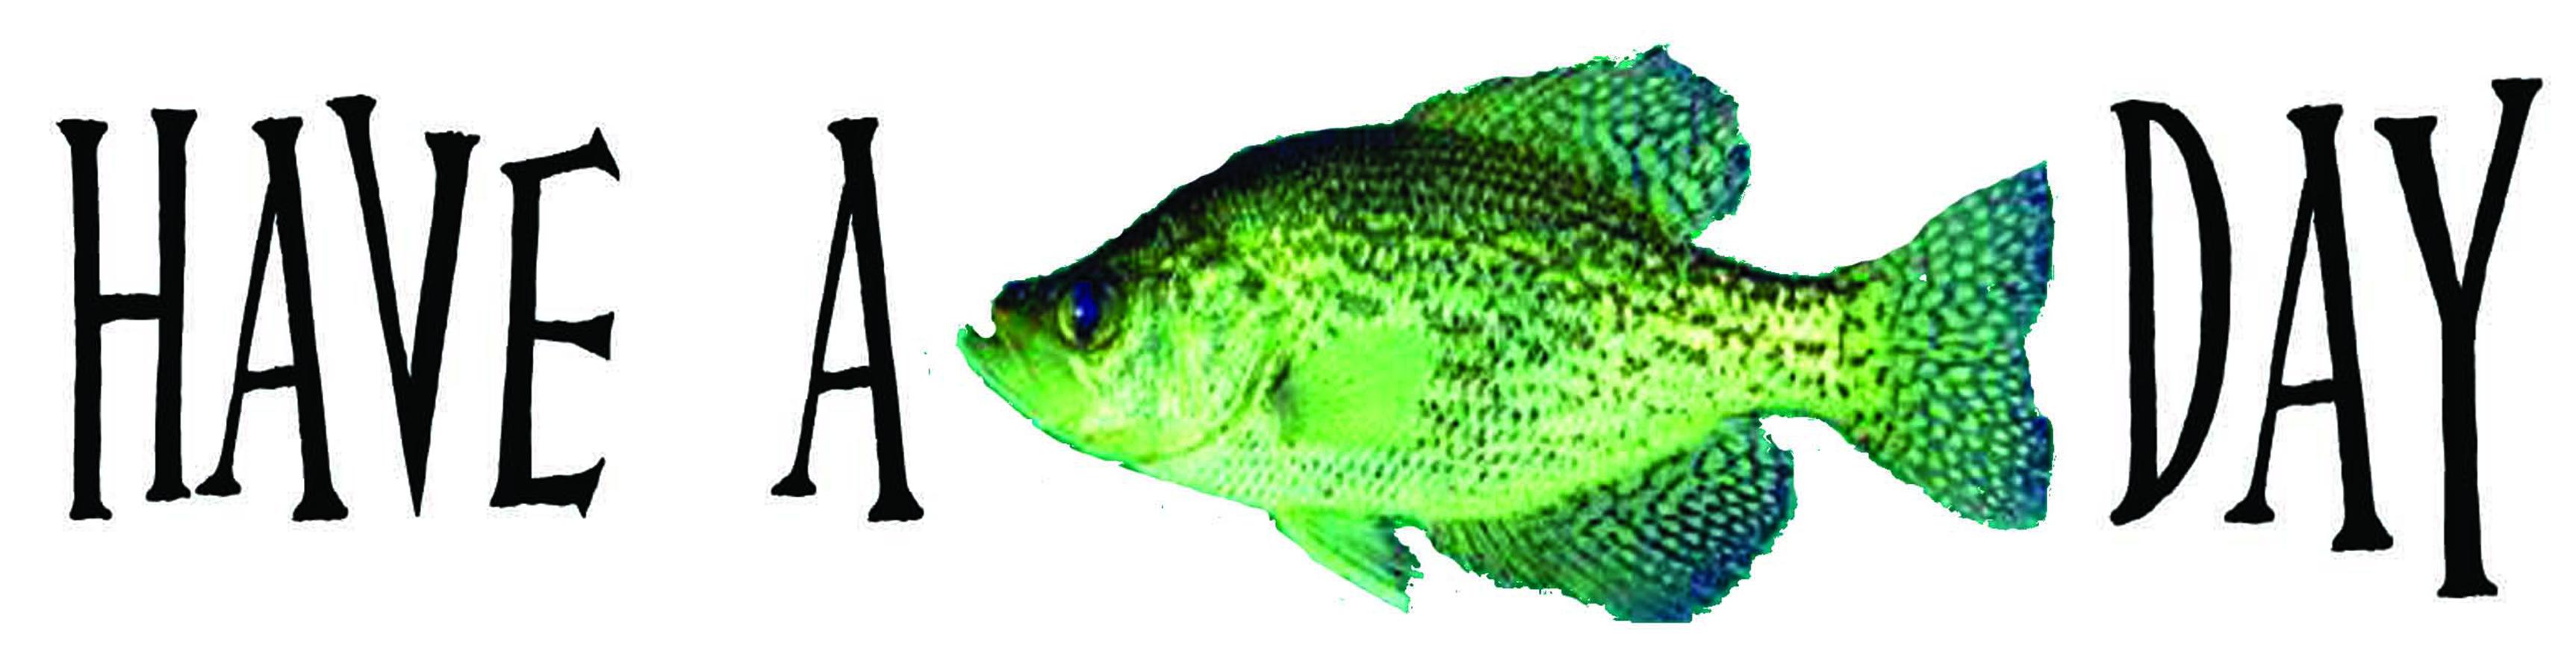 Have A Crappie Day White Background Printcuda